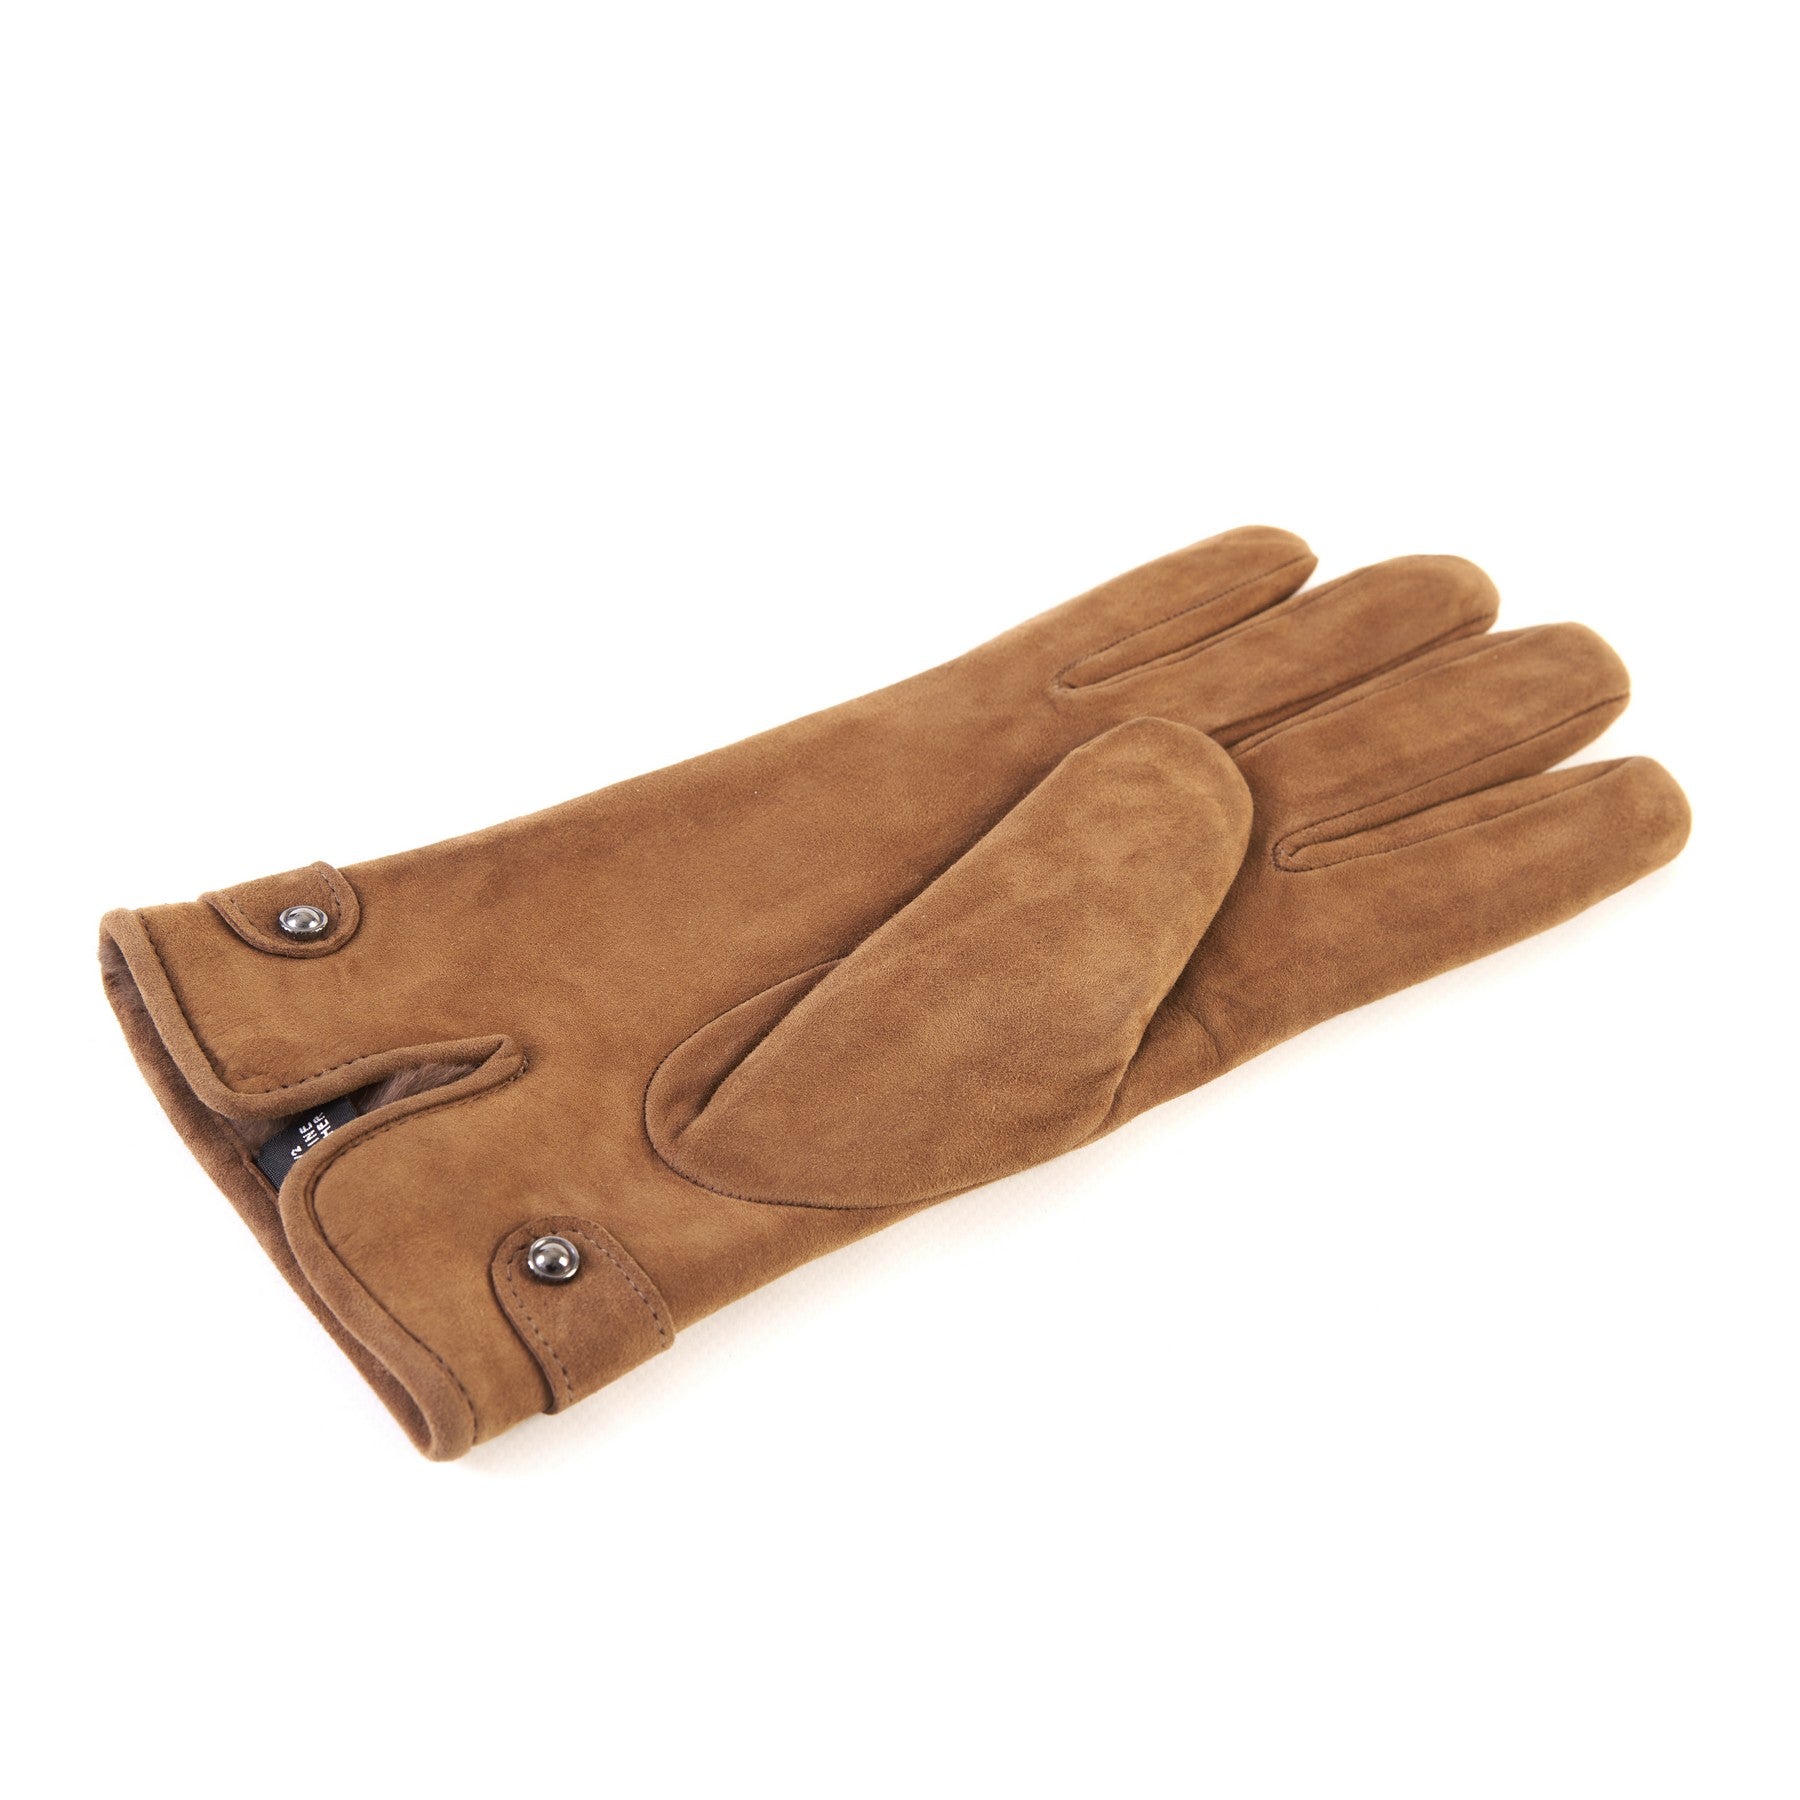 Men's camel suede leather gloves with strap and cashmere lining